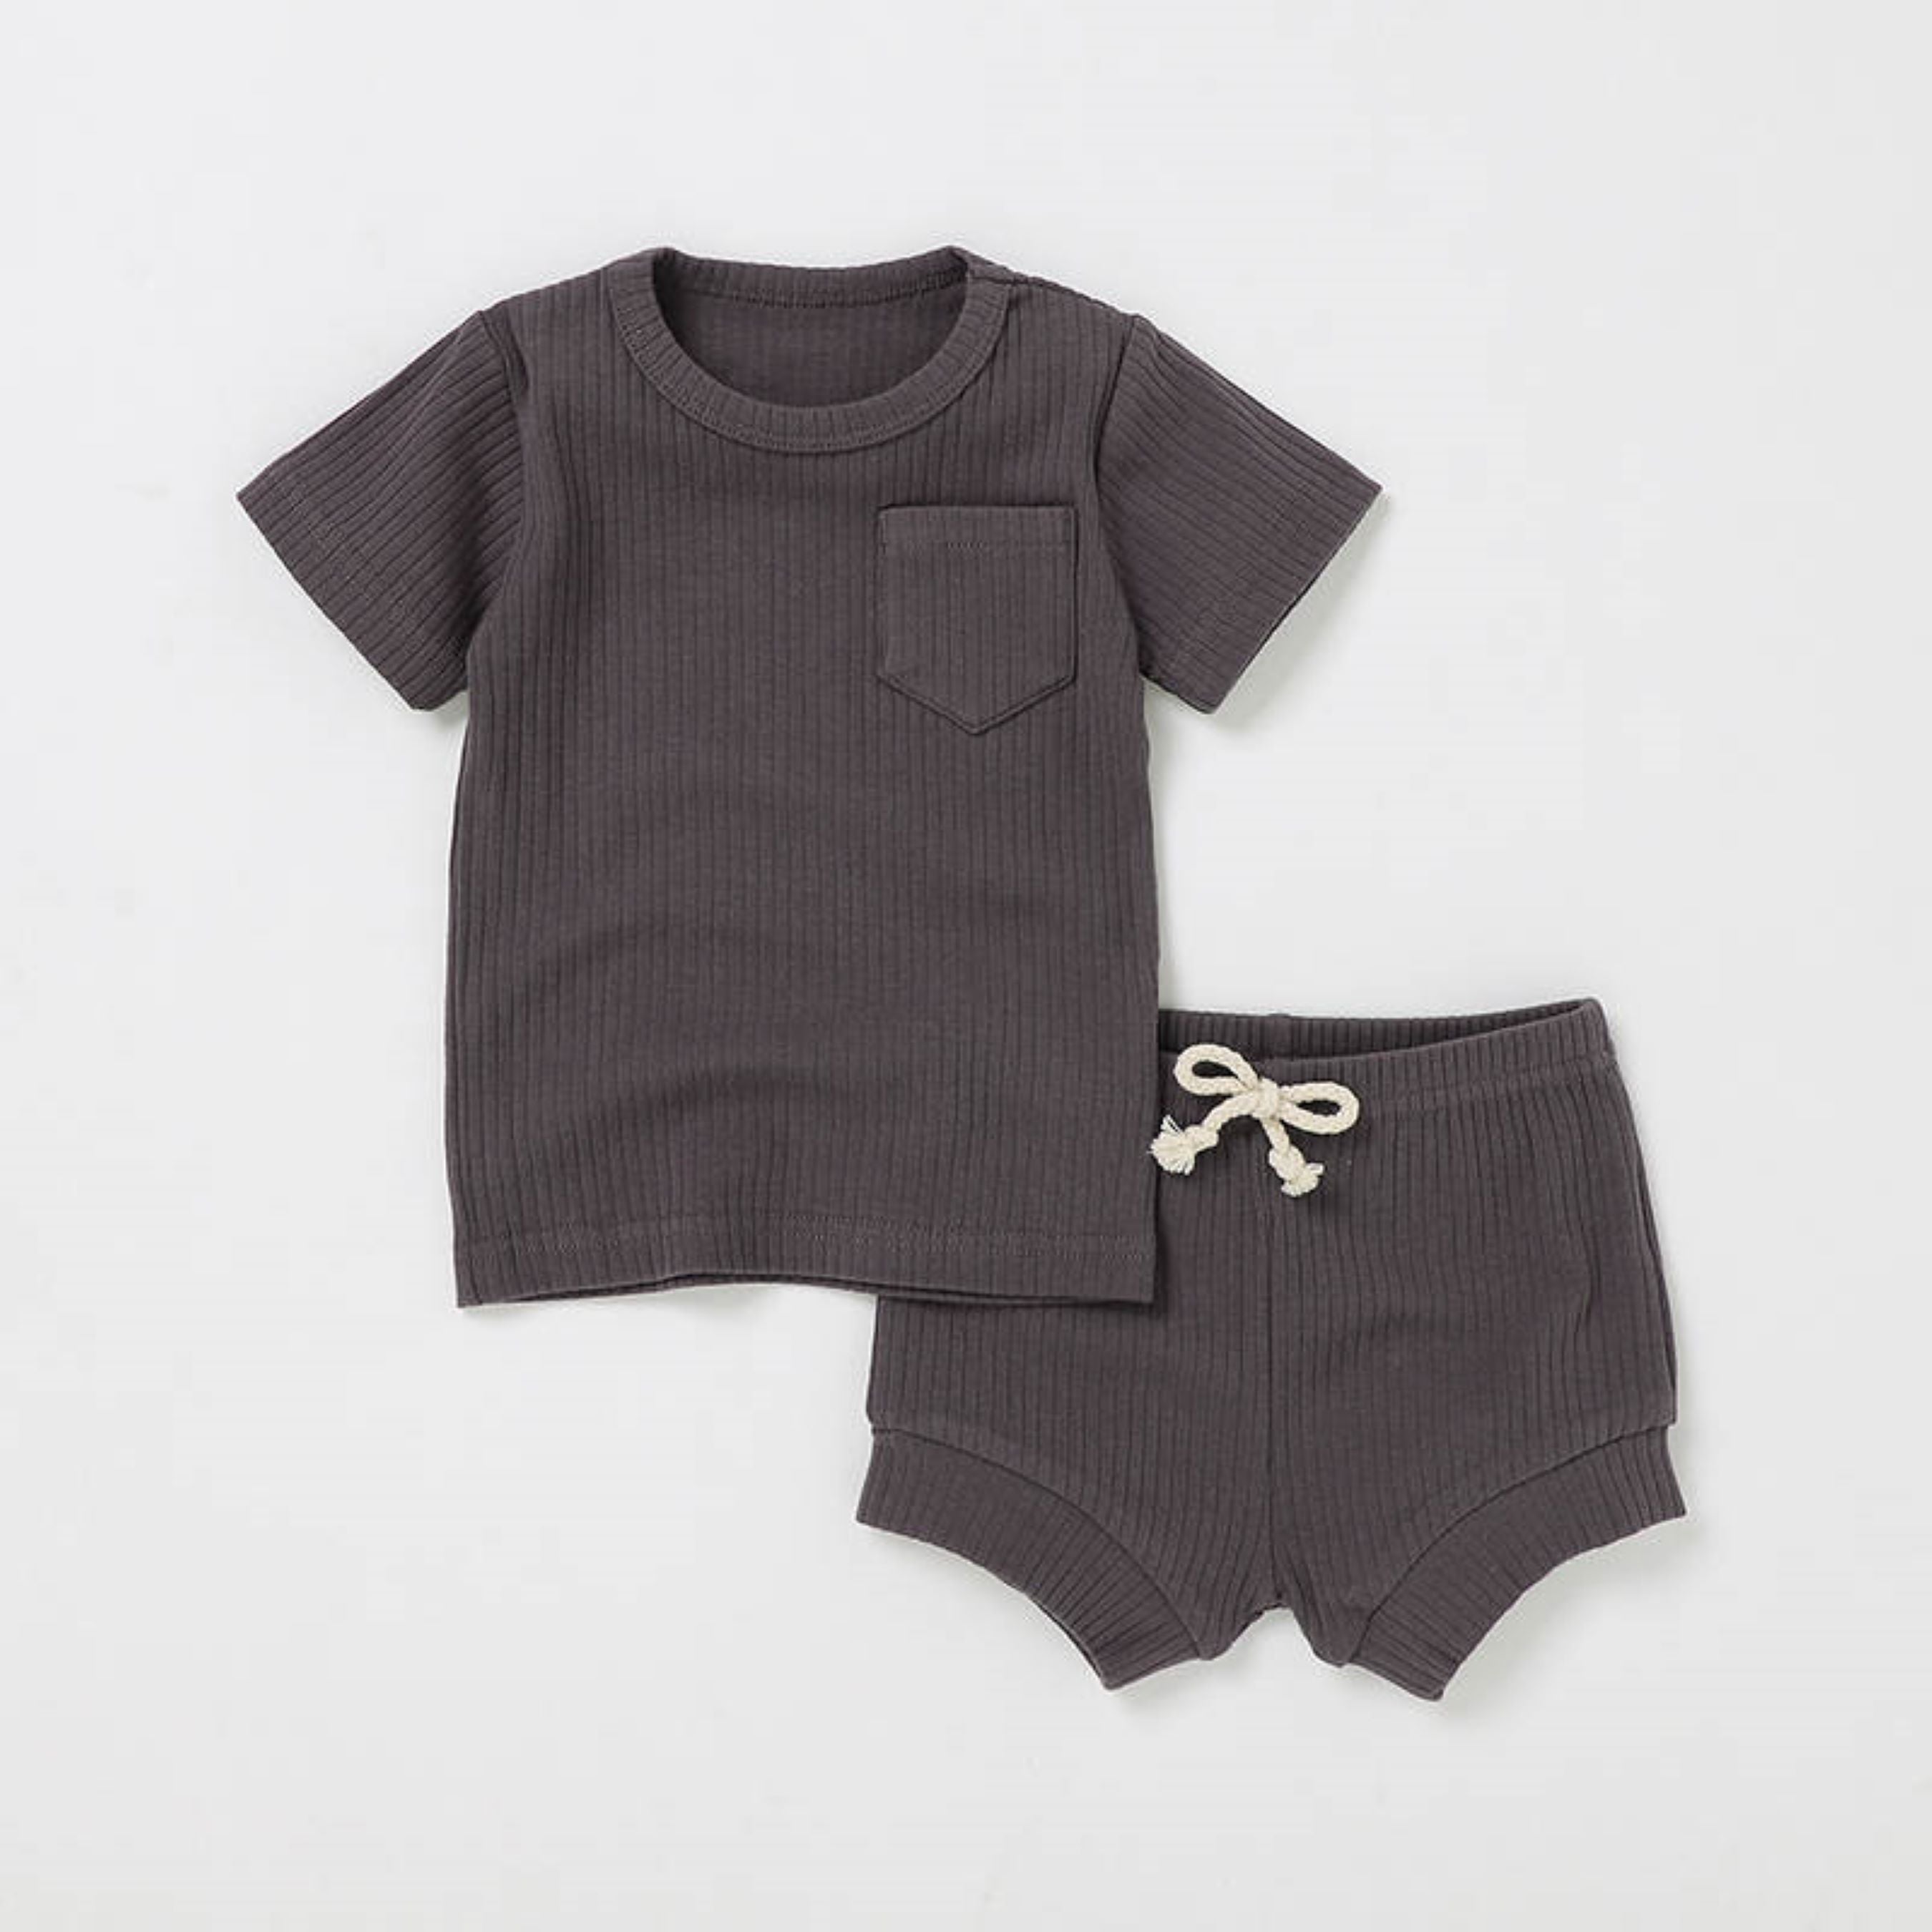 2 piece short sleeve pajama set in truffle.  The set includes a short sleeve top and matching pull on shorts.  It is made from soft, GOTS certified organic cotton.